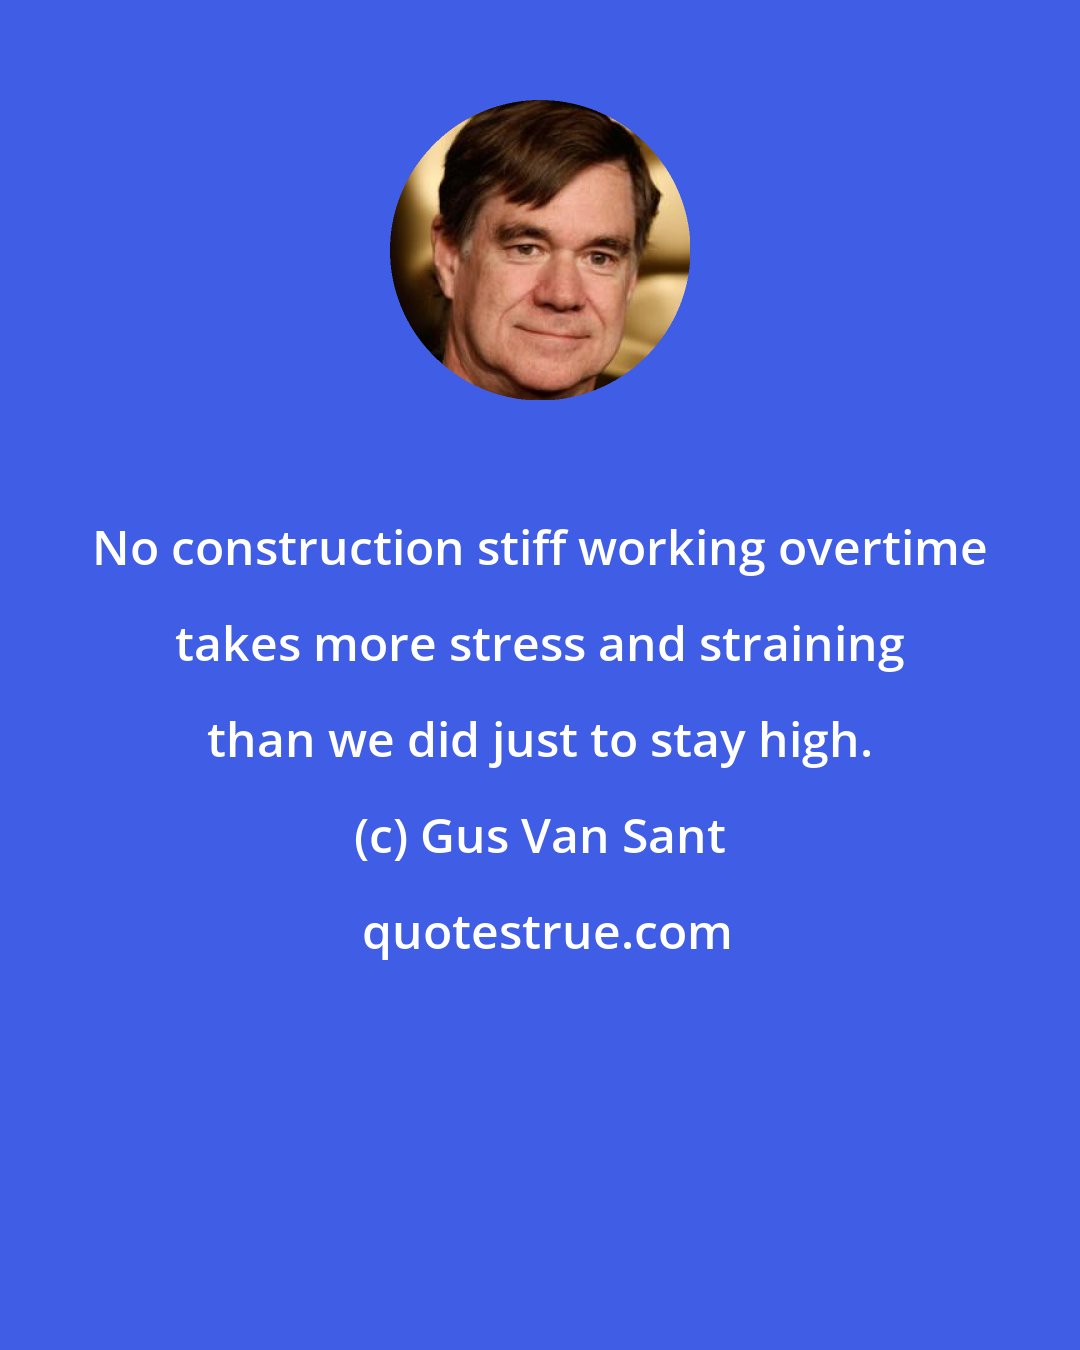 Gus Van Sant: No construction stiff working overtime takes more stress and straining than we did just to stay high.